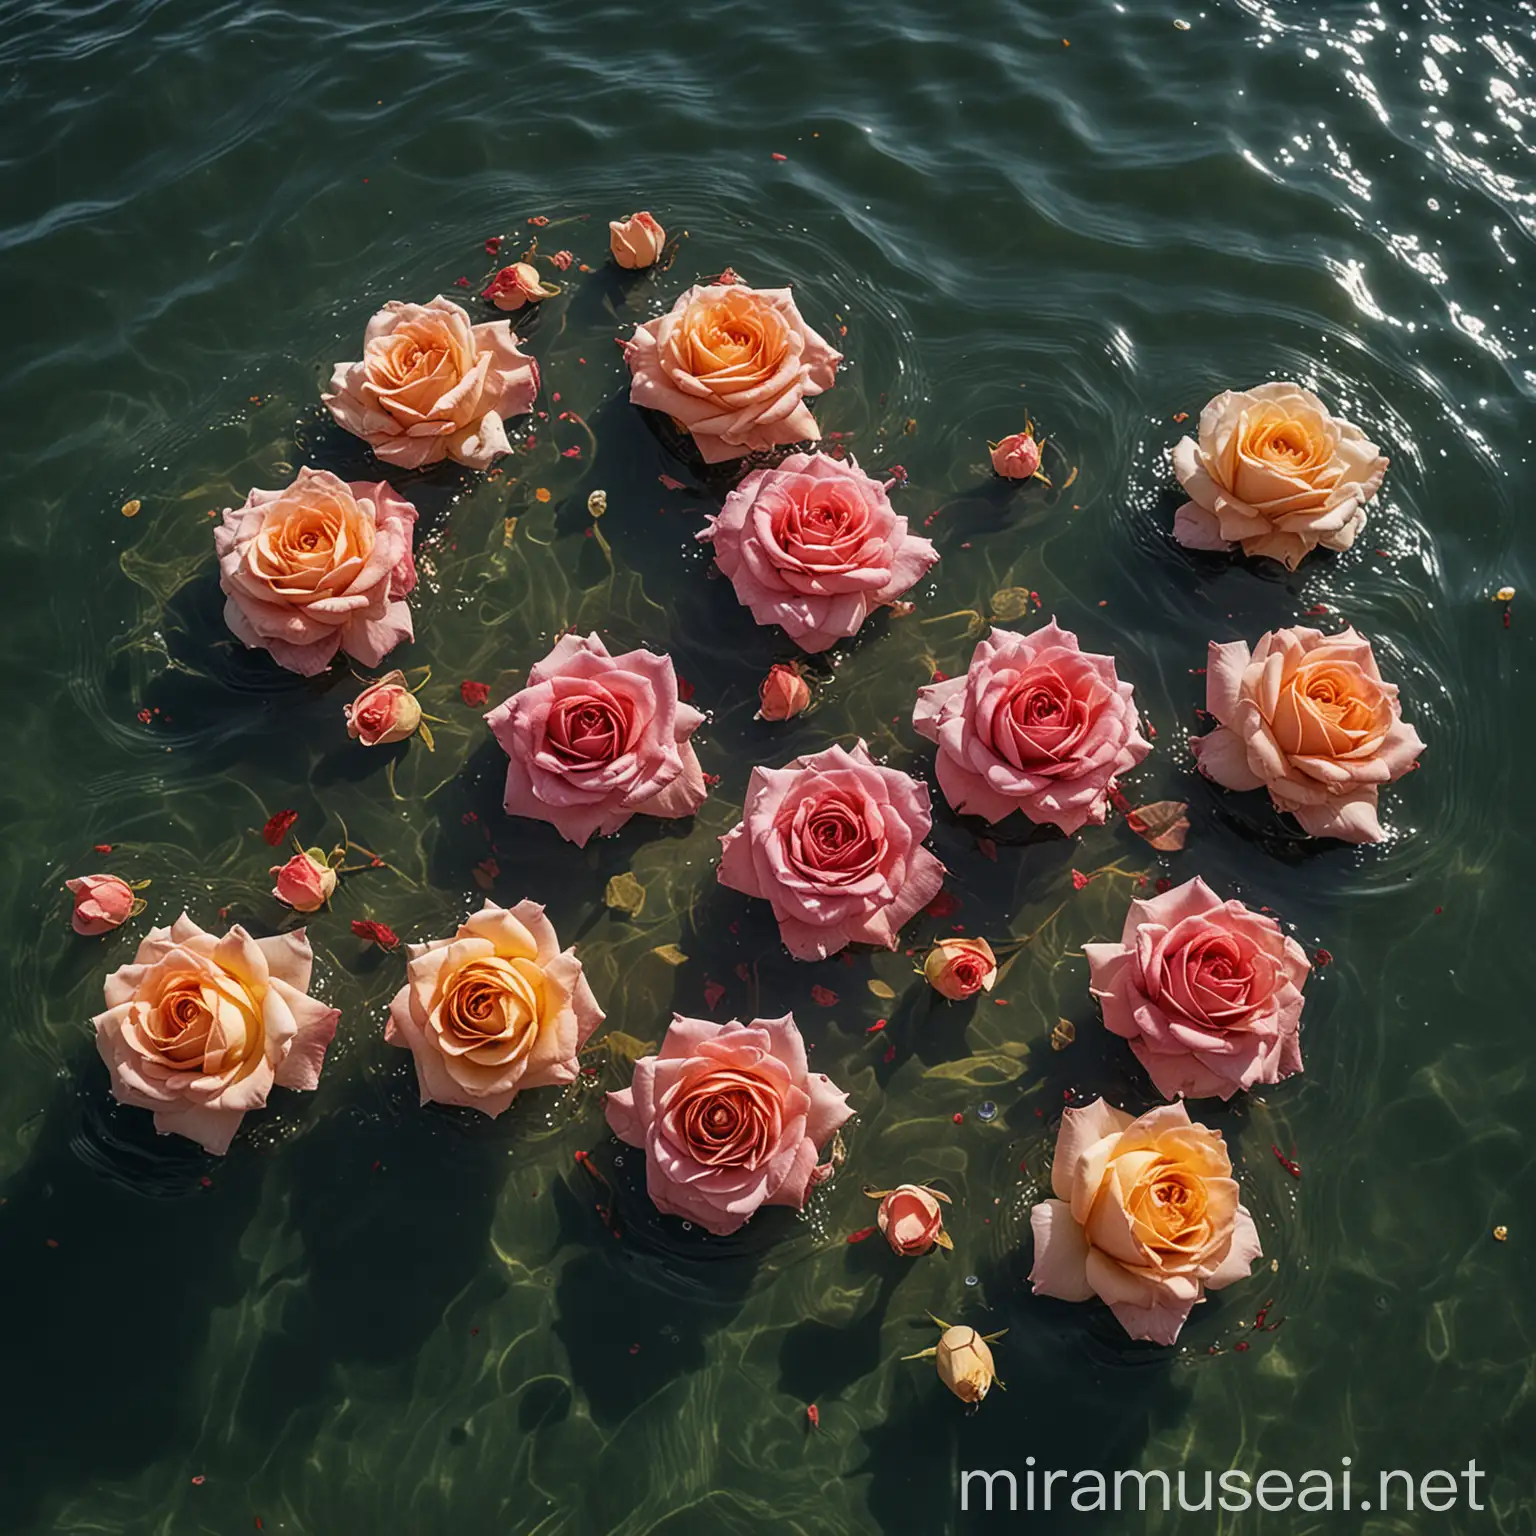 Colorful Blooming Roses Floating in the Sea